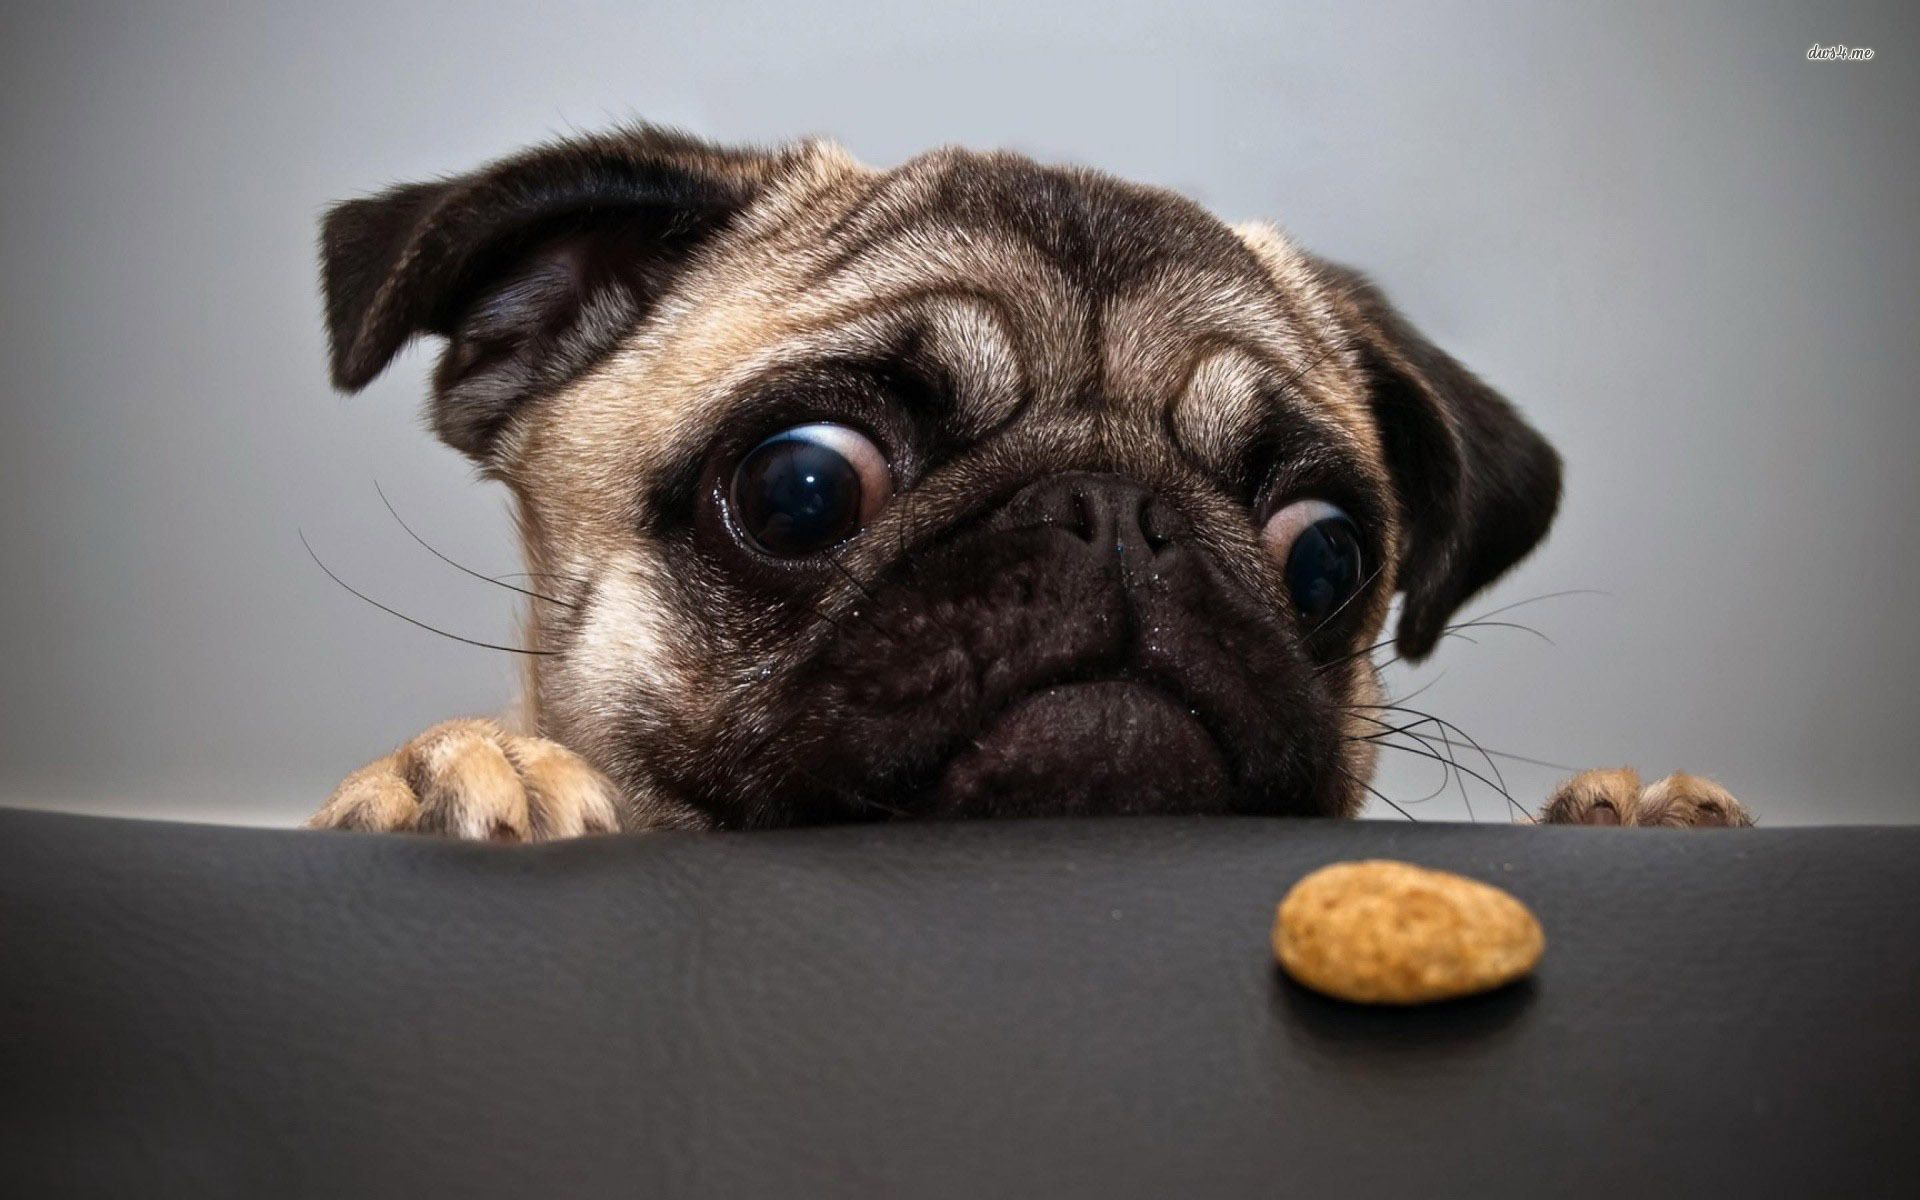 Pug wanting the cookie wallpaper - Animal wallpapers